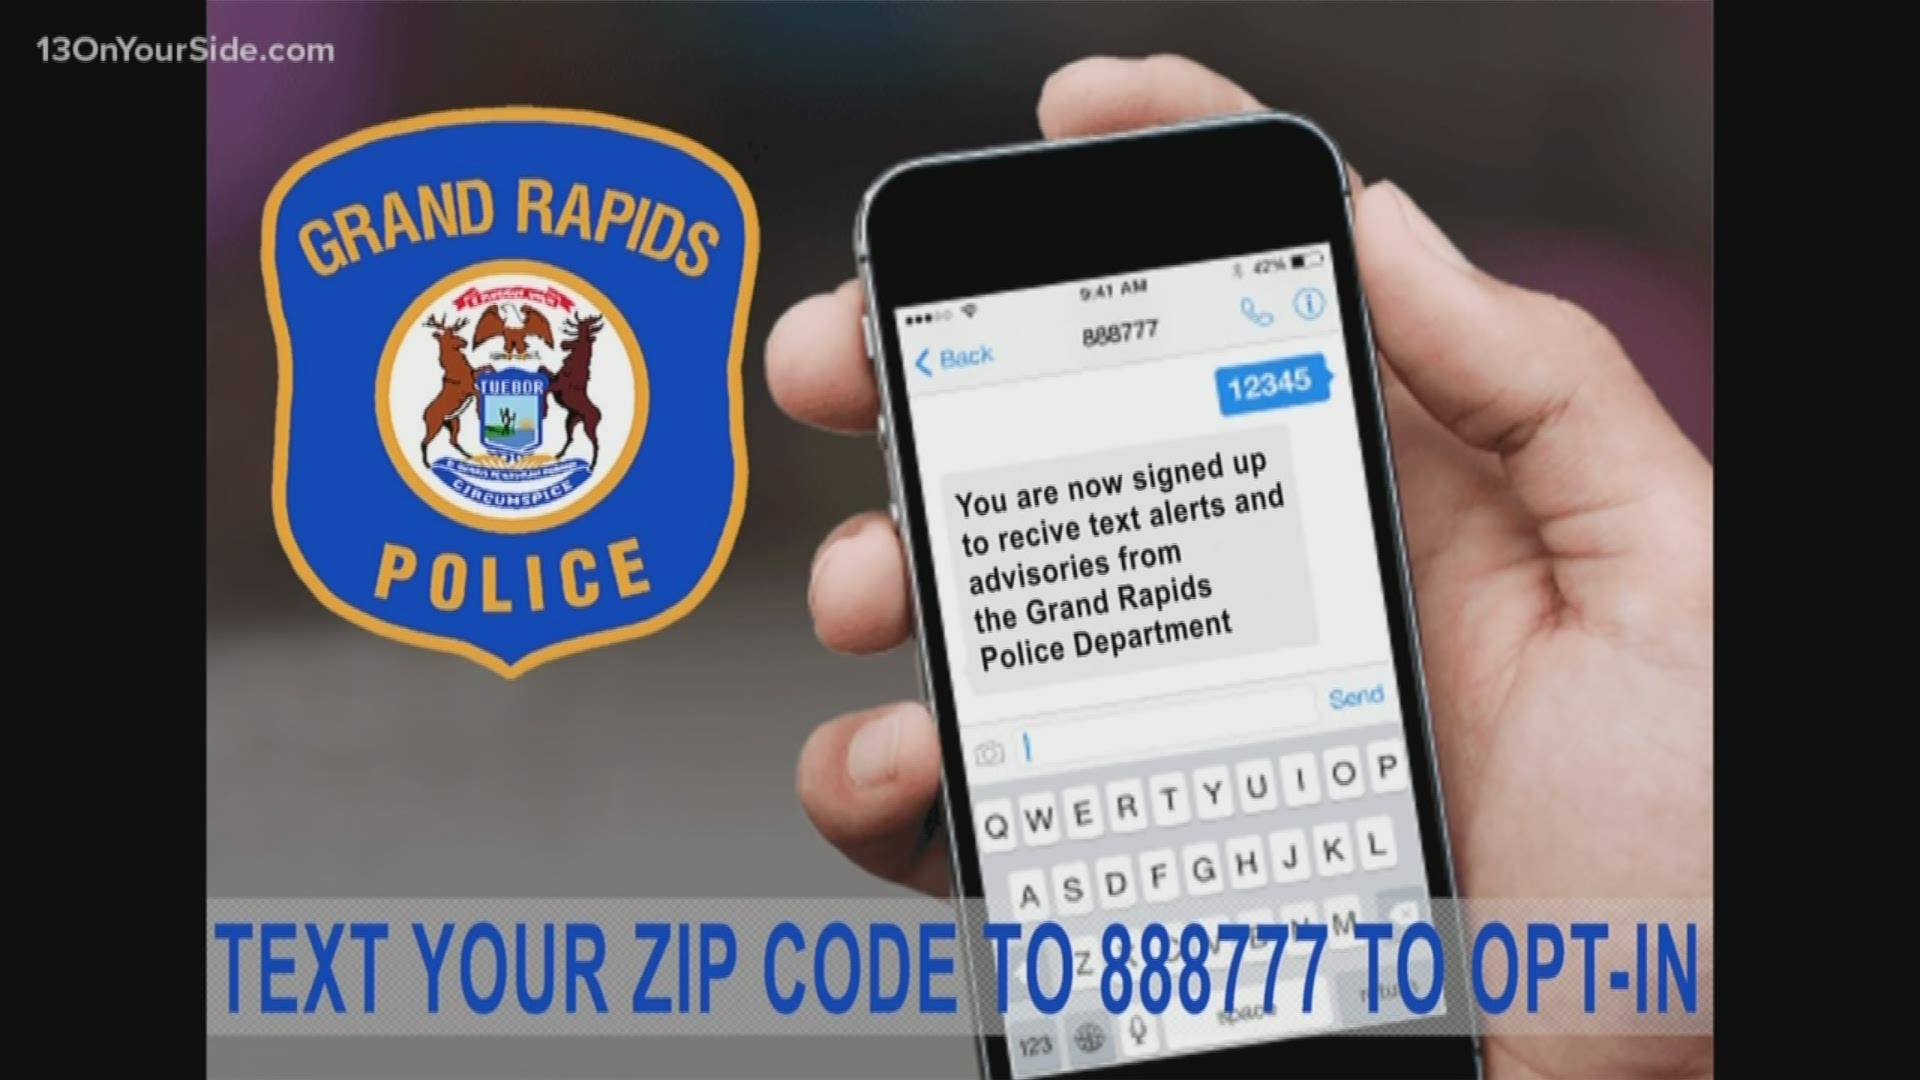 The Grand Rapids Police Department has launched a new community notification system that will alert area residents in real-time of emergency situations.